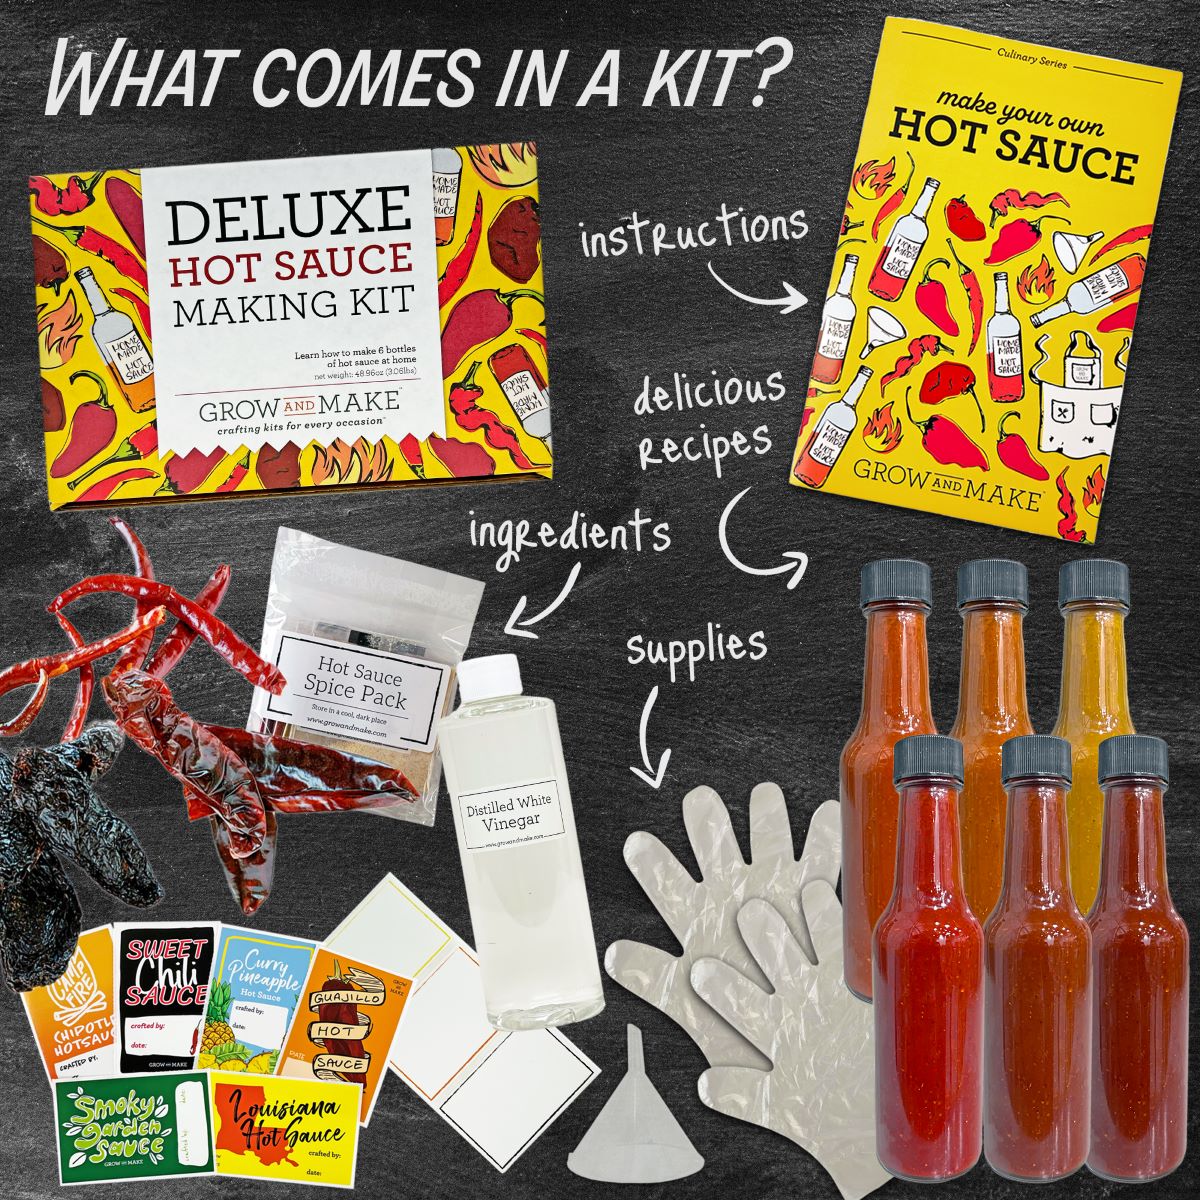 Hot Sauce kit from Grow and Make